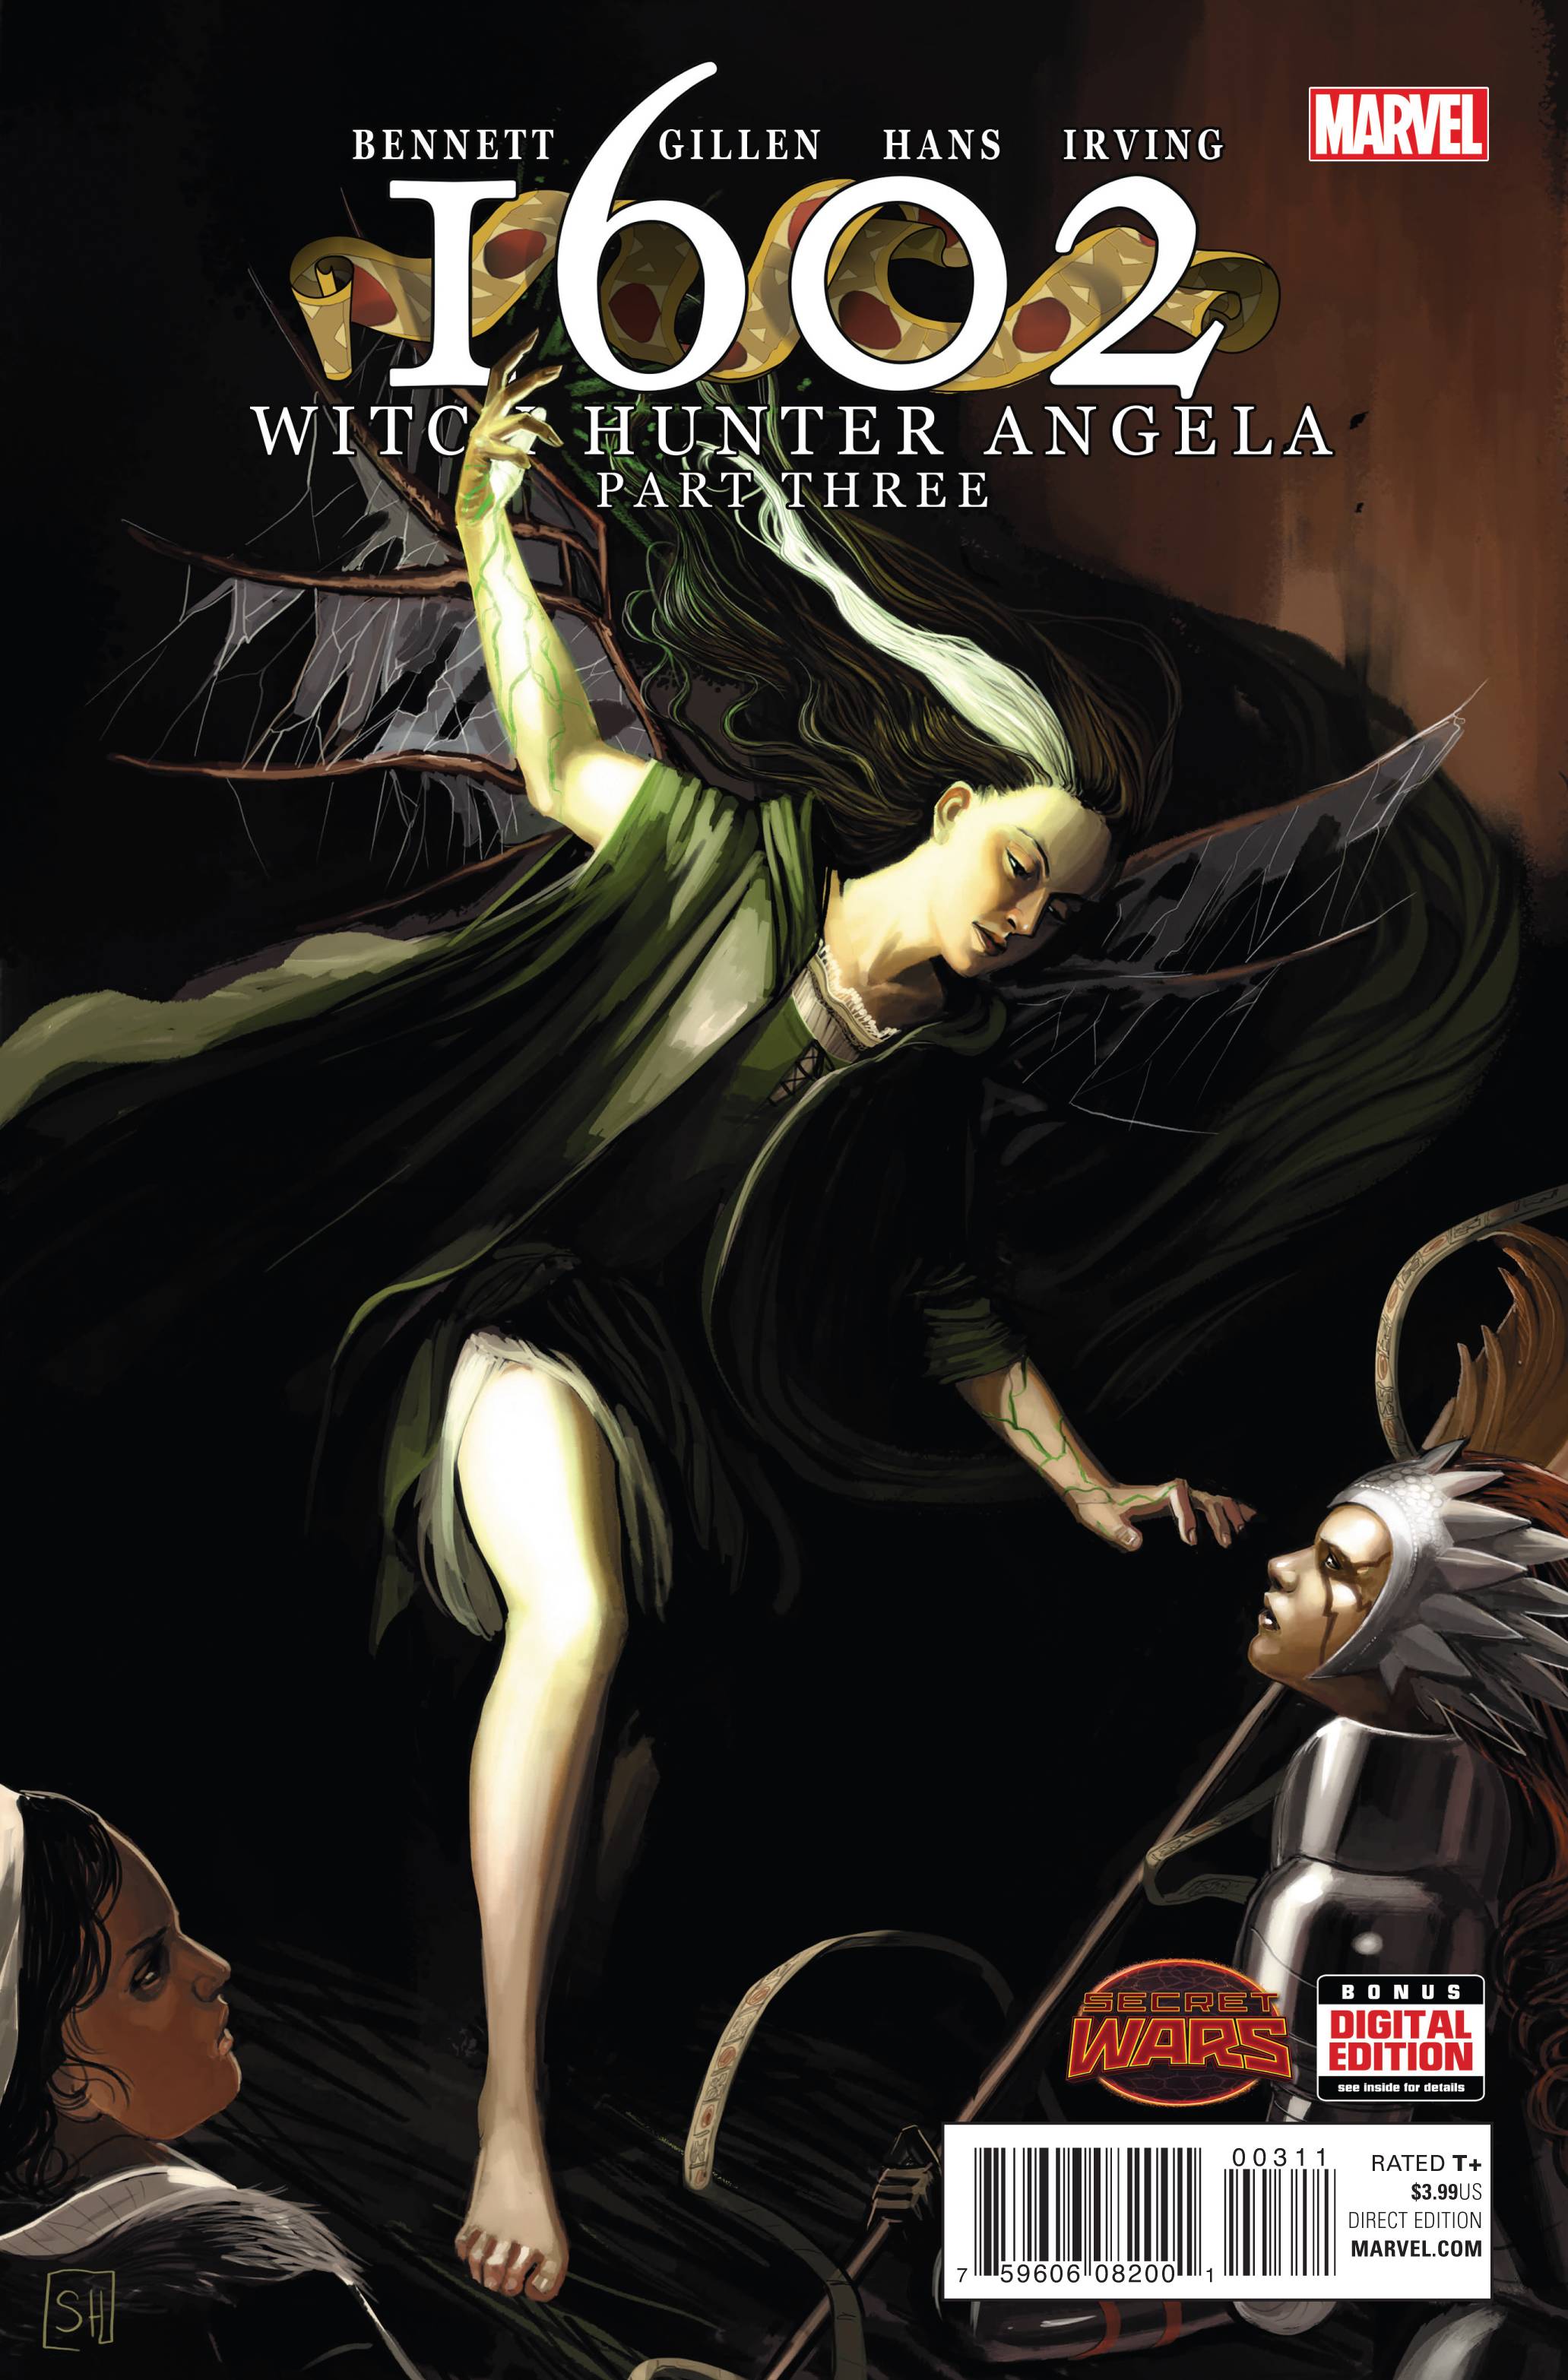 1602 Witch Hunter Angela #3 Cover A